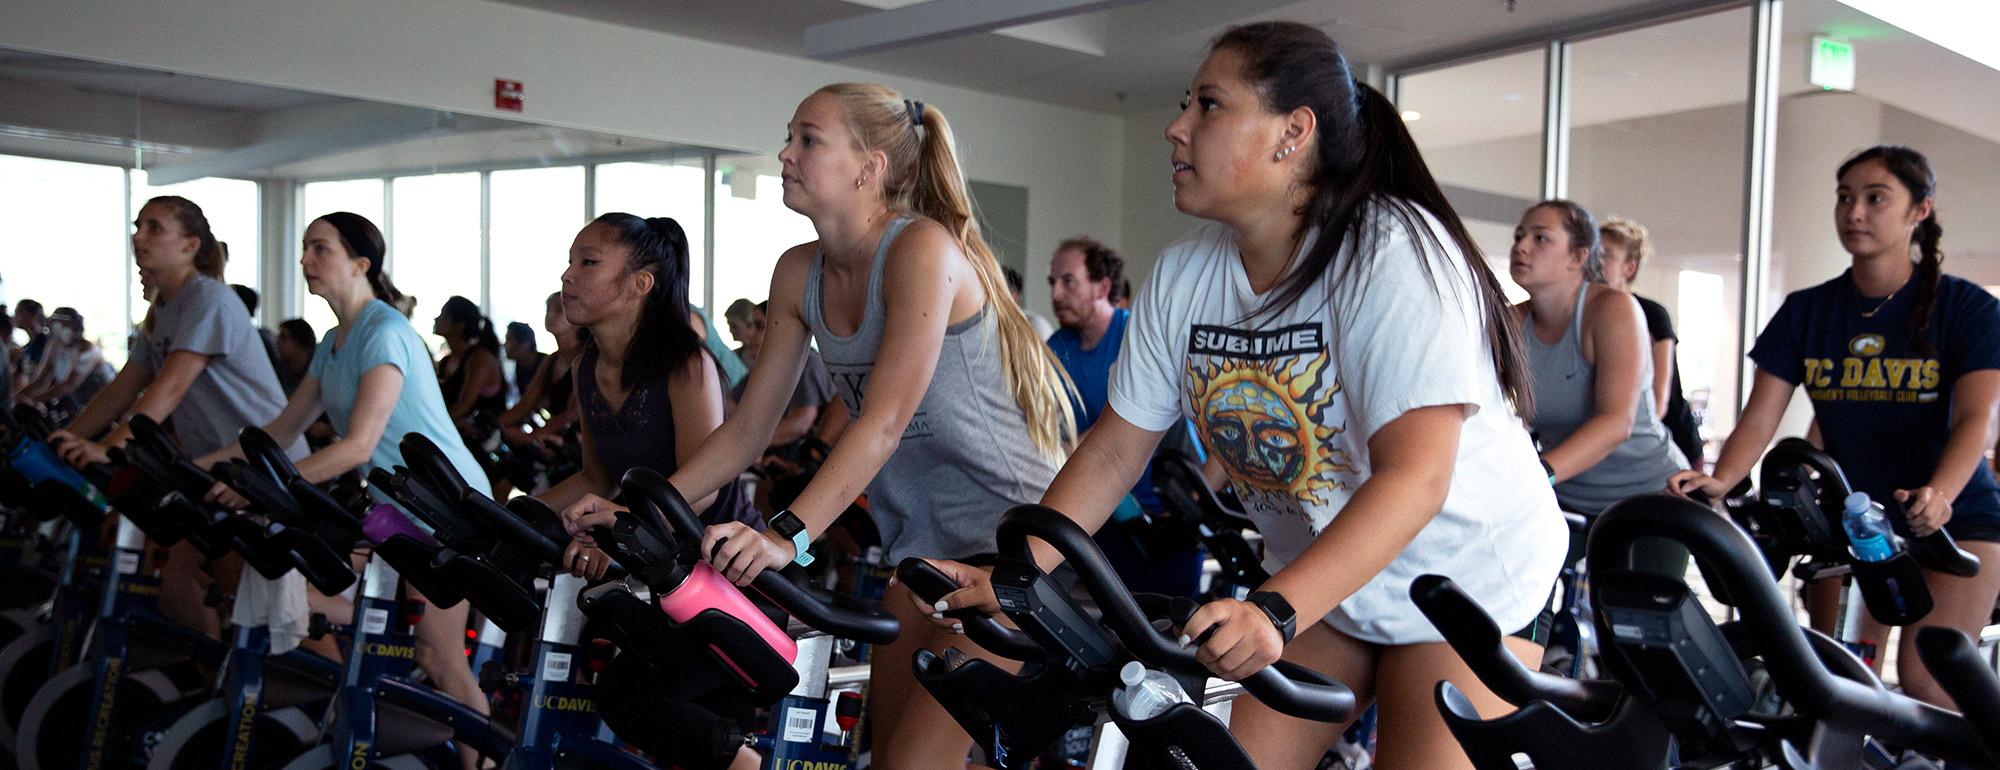 People riding stationary bikes in an indoor cycling studio